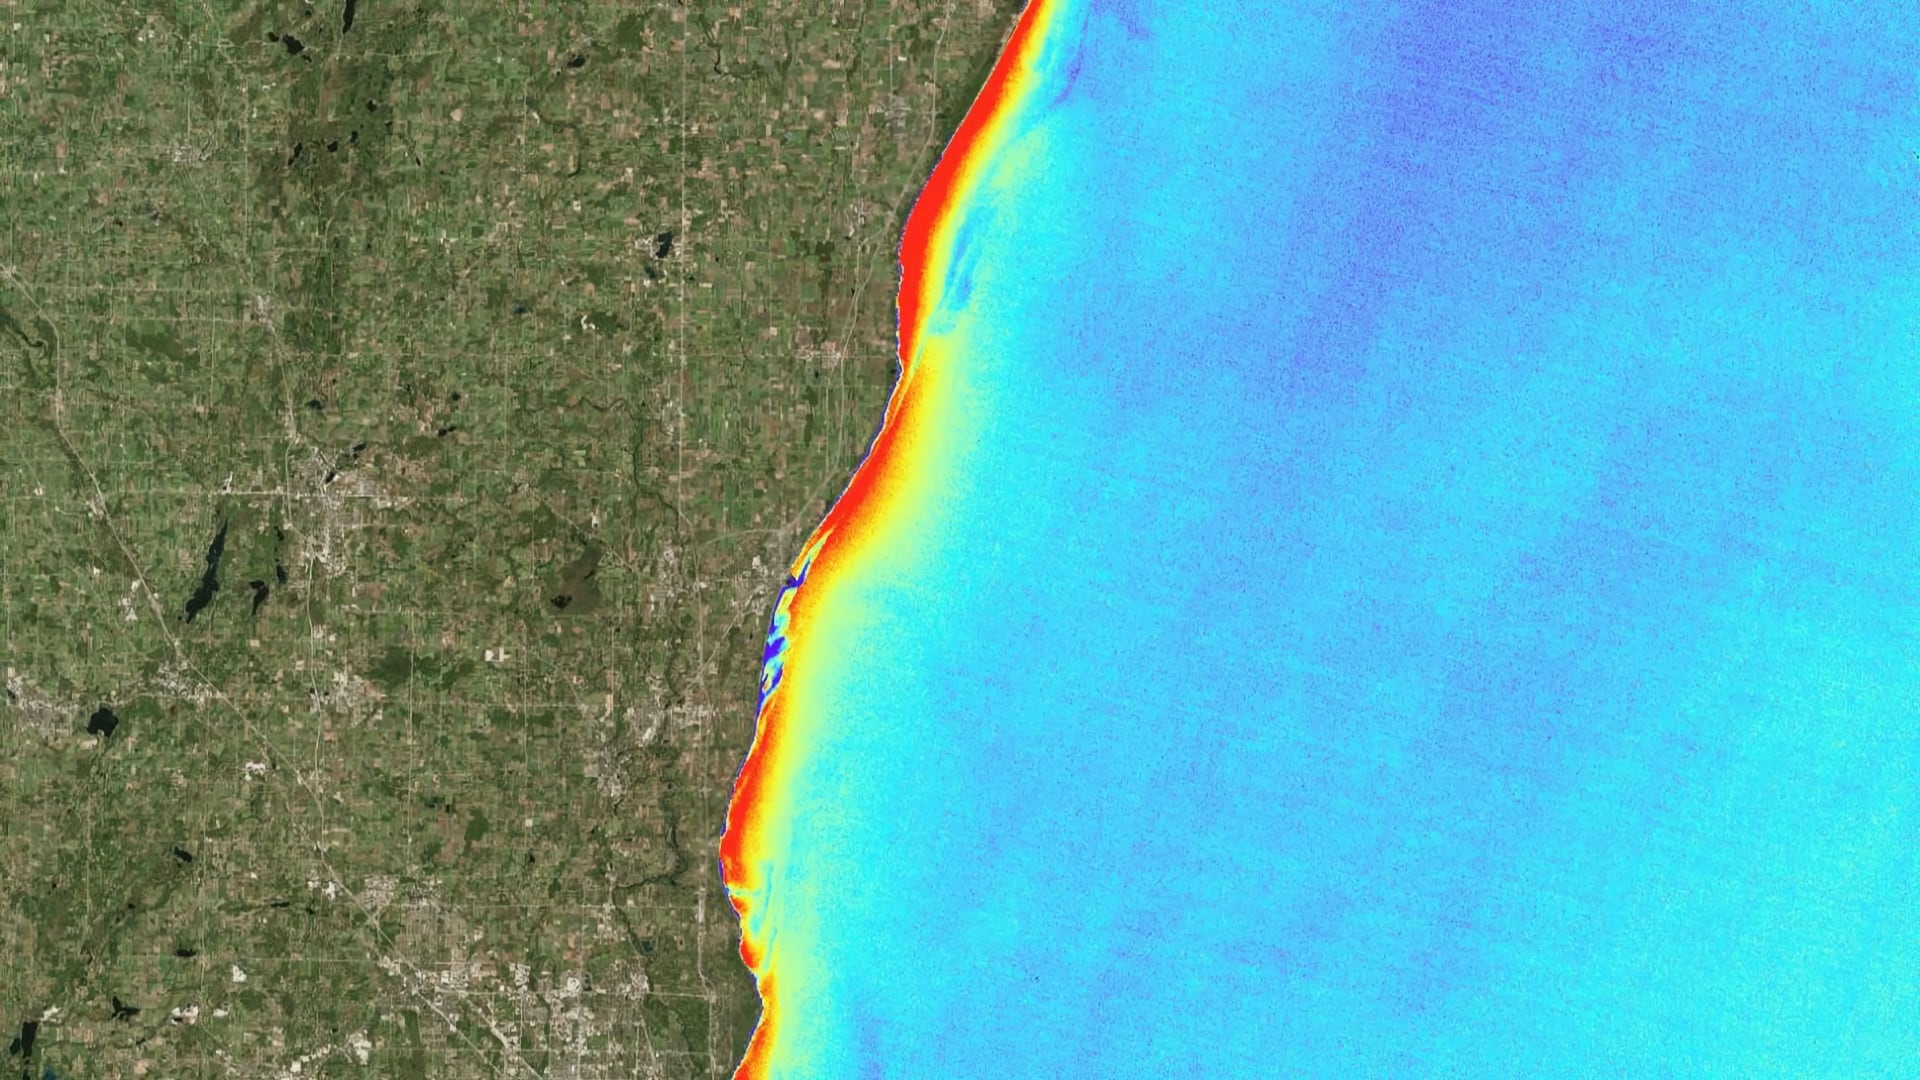 Utilizing Multispectral Satellite Imagery to Monitor and Predict the Displacement of Cladophora along the Milwaukee County Shoreline